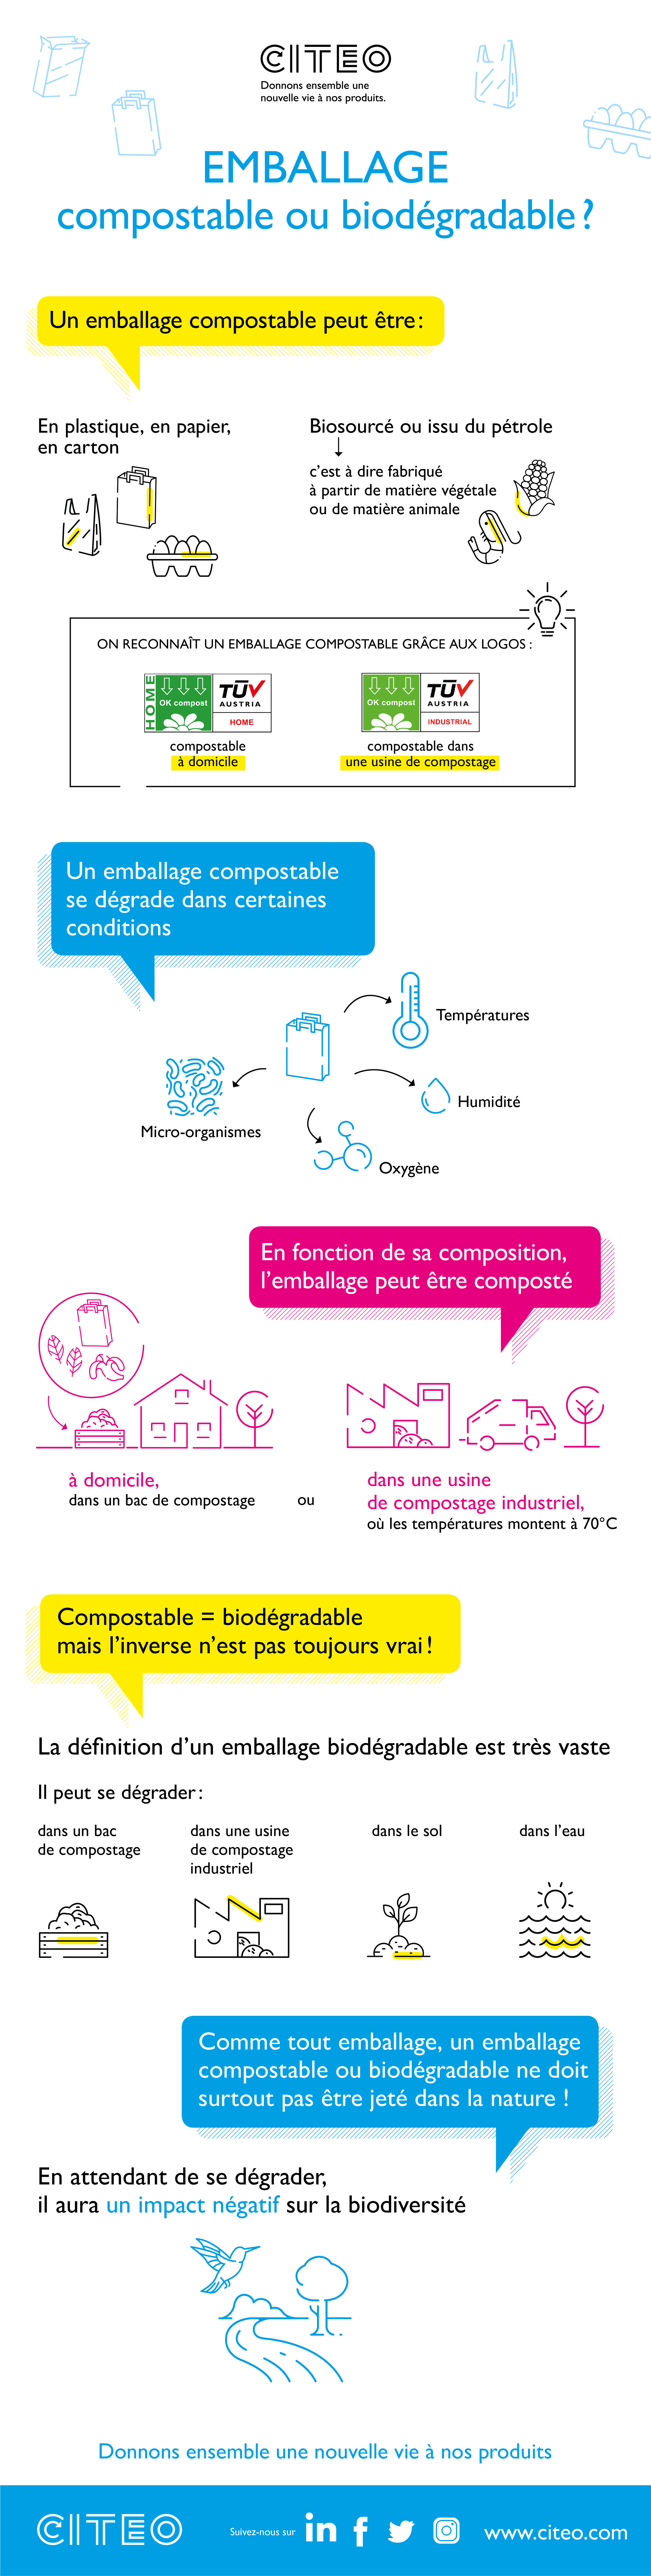 Infographie compostable